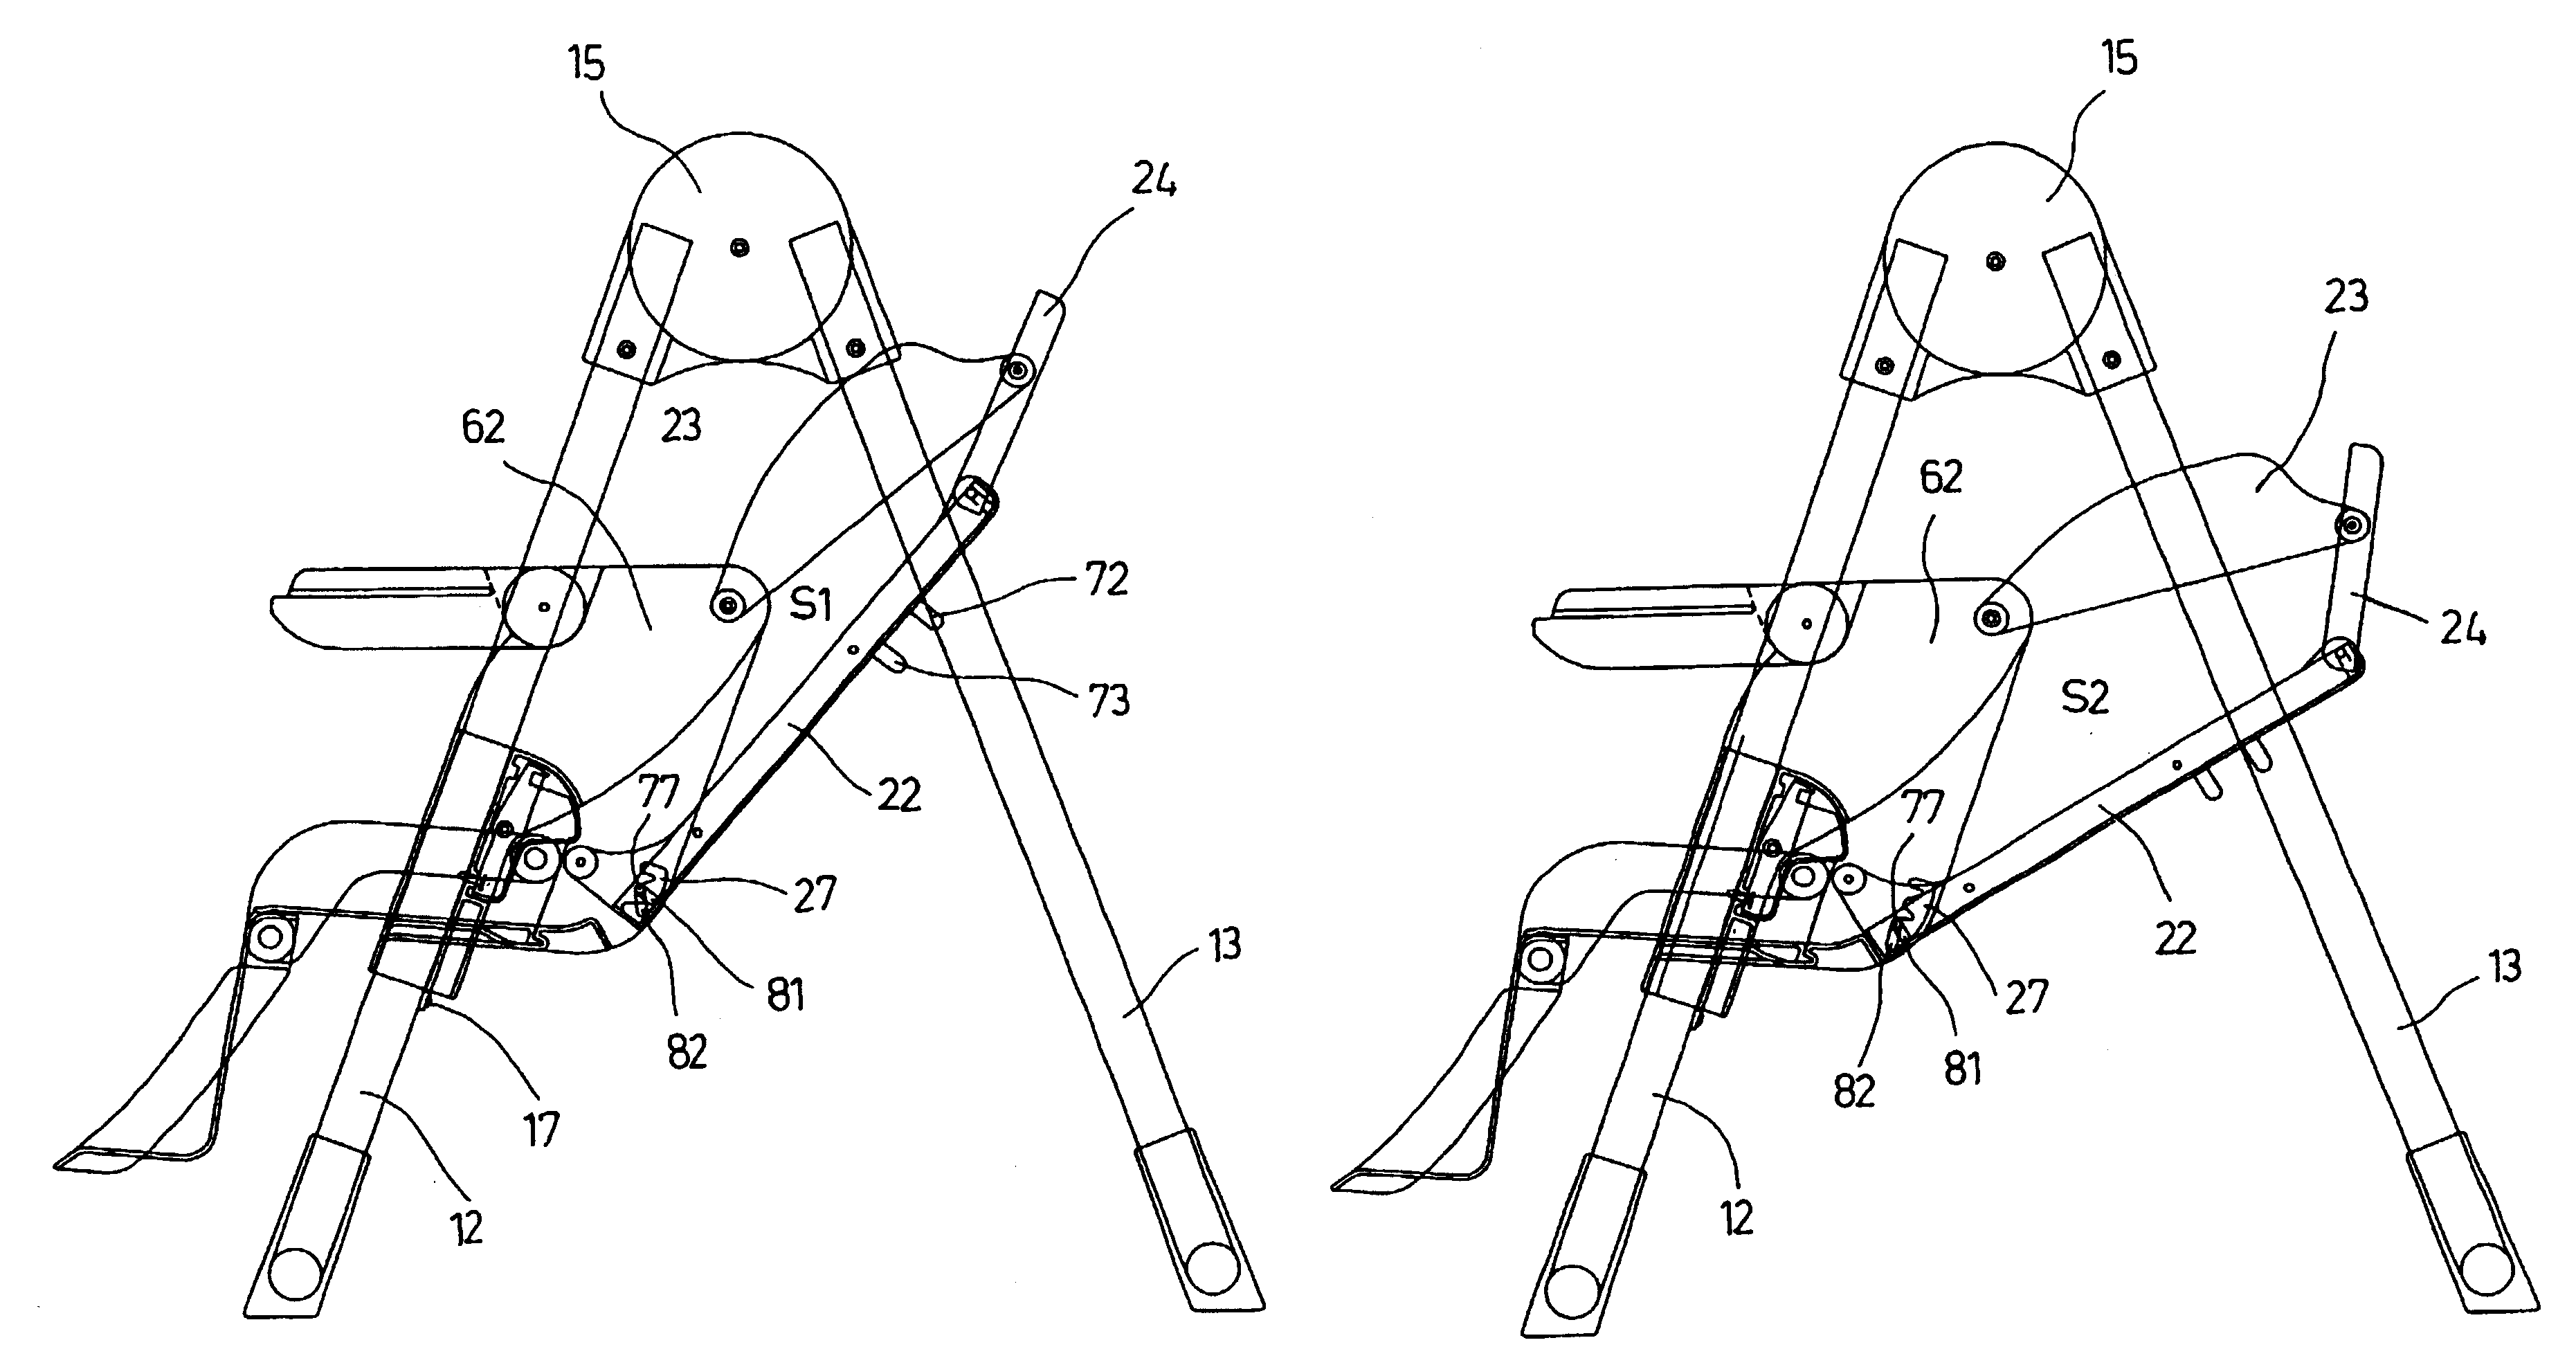 Backrest adjusting mechanism used in high chair for infants, toddlers, and small children